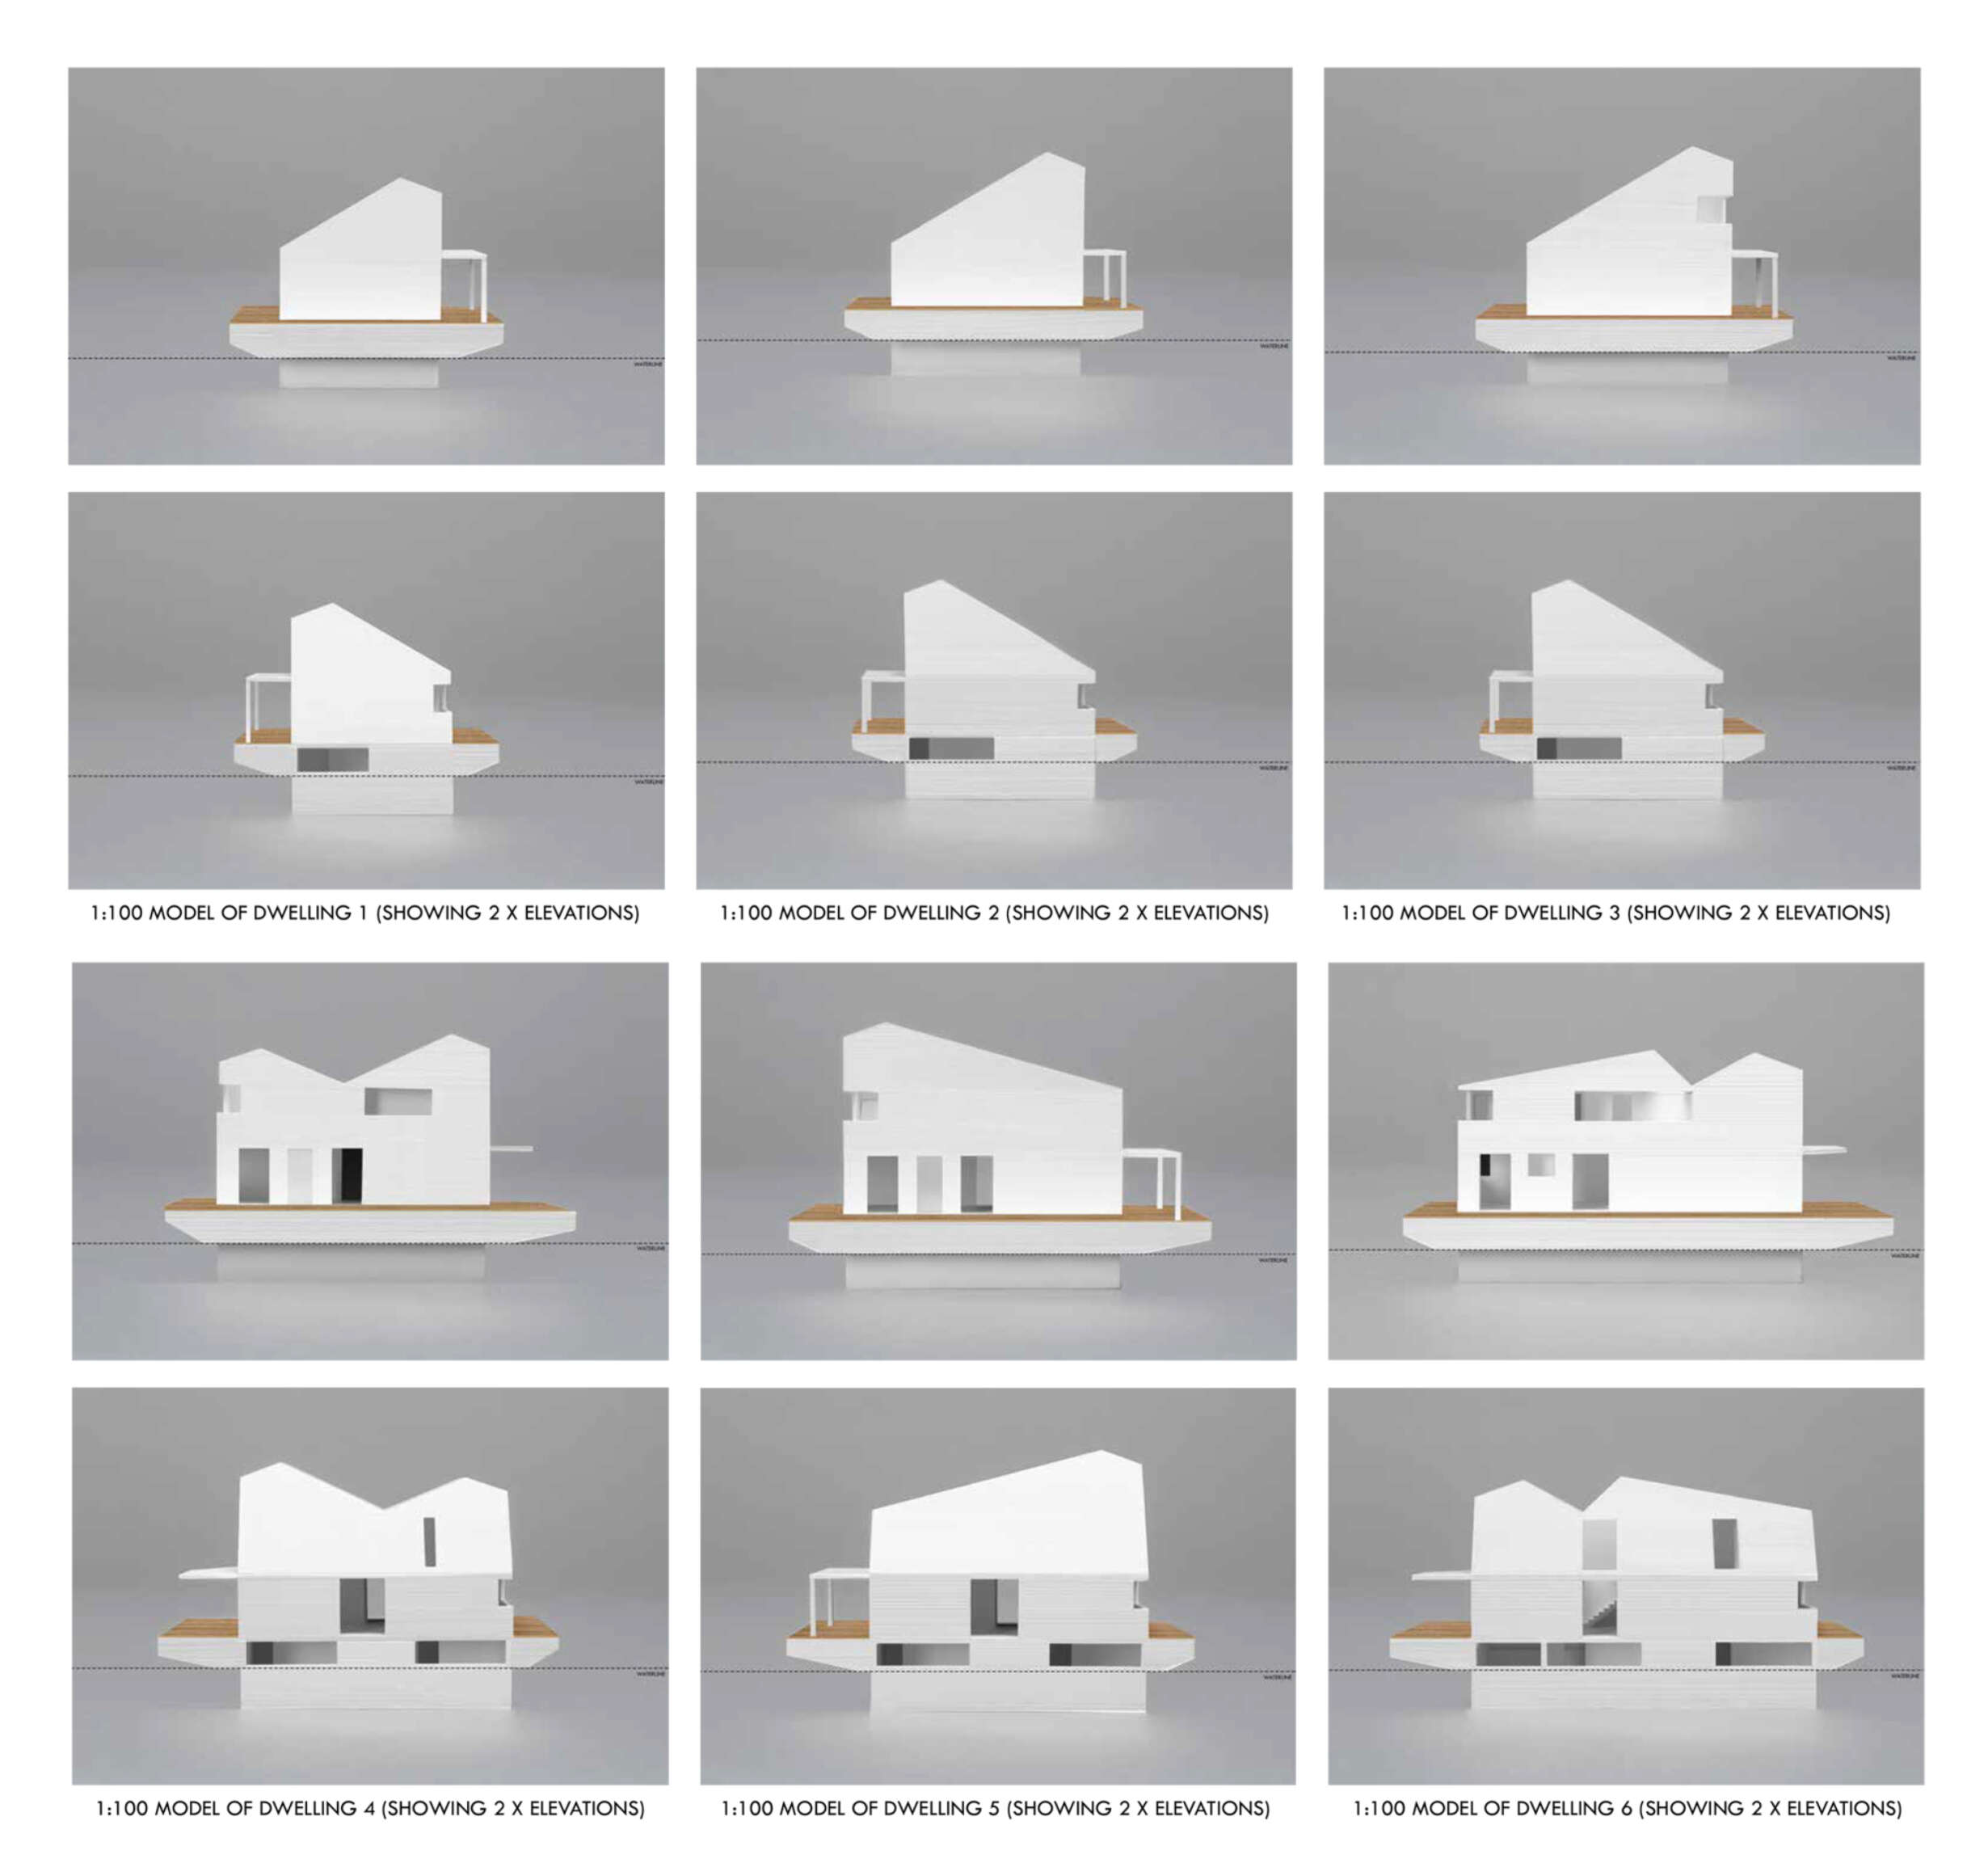 Physical Models of Dwellings